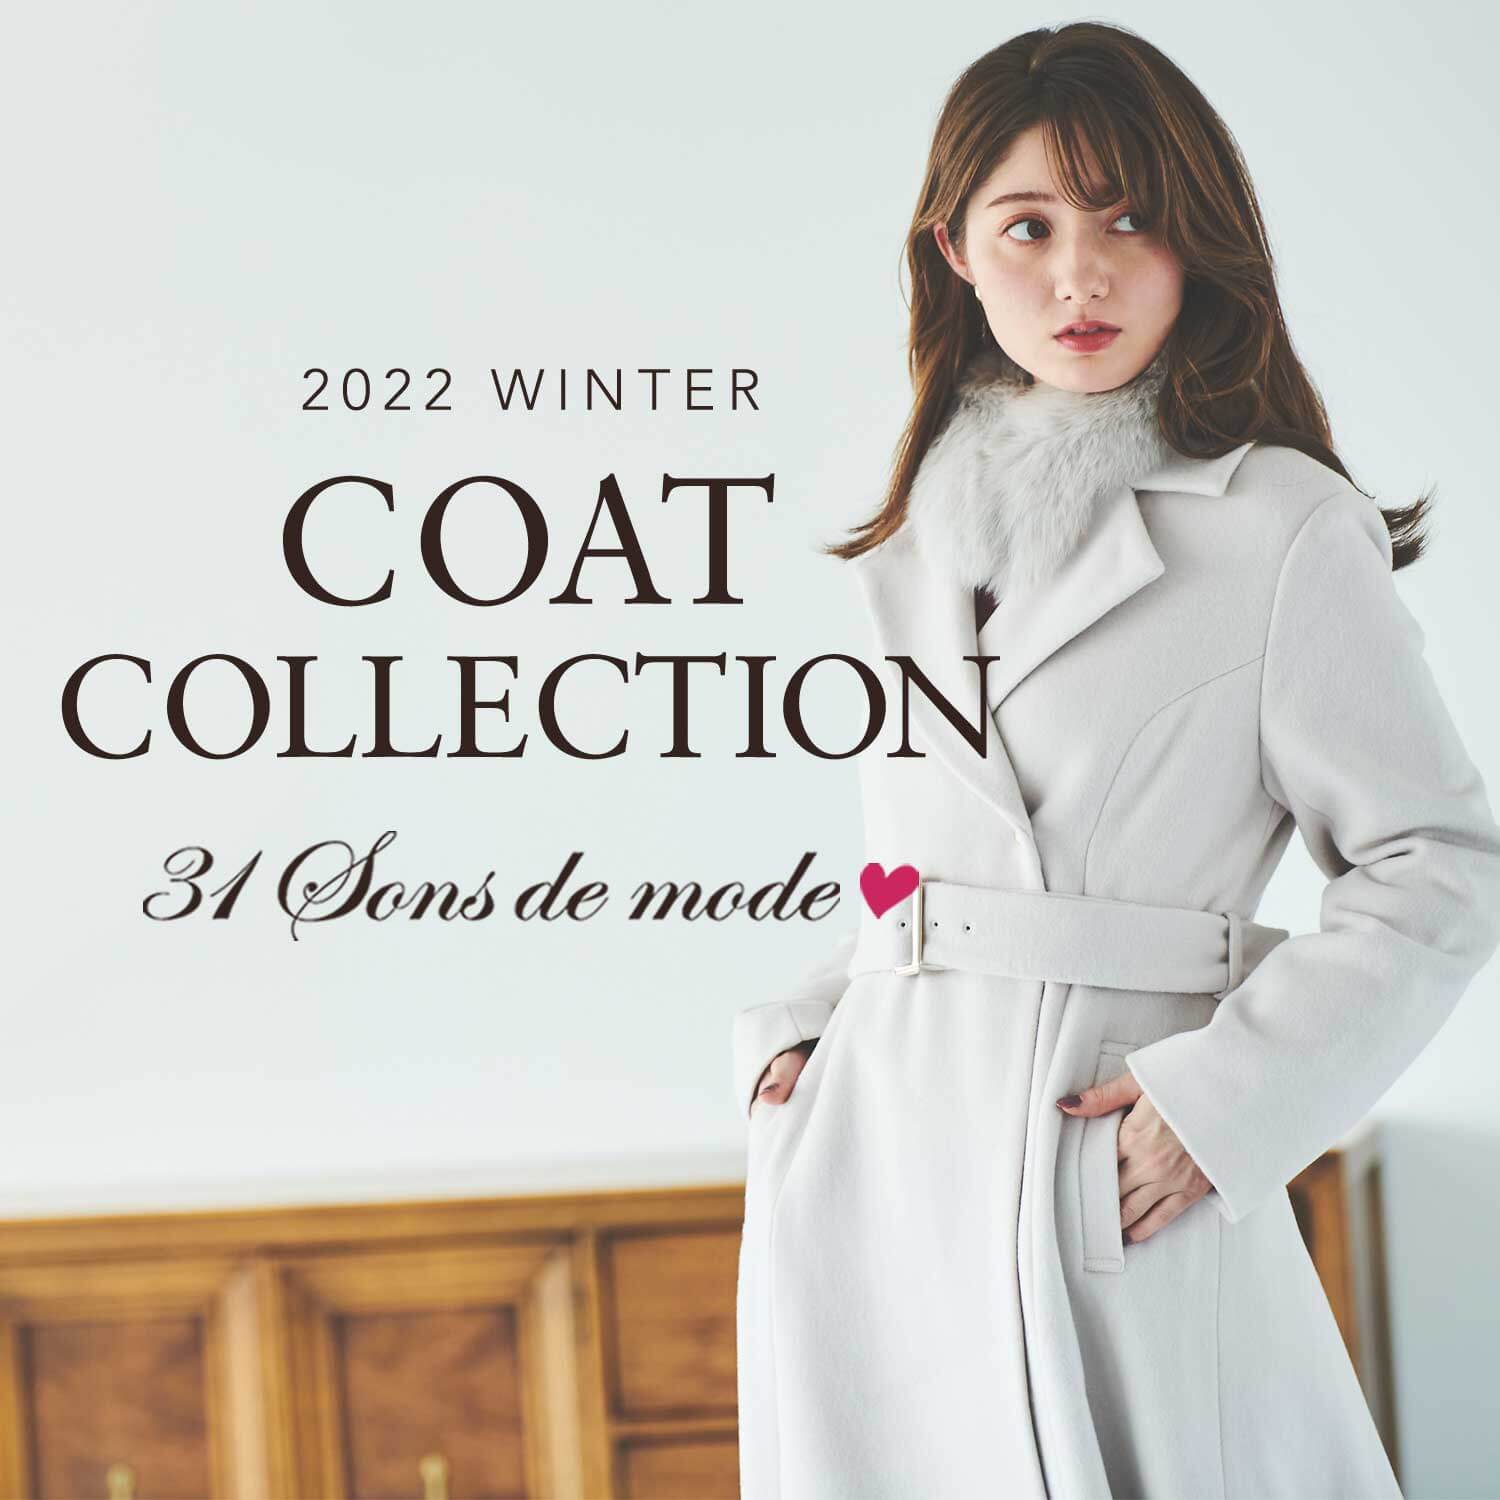 WINTER COAT COLLECTION_2022